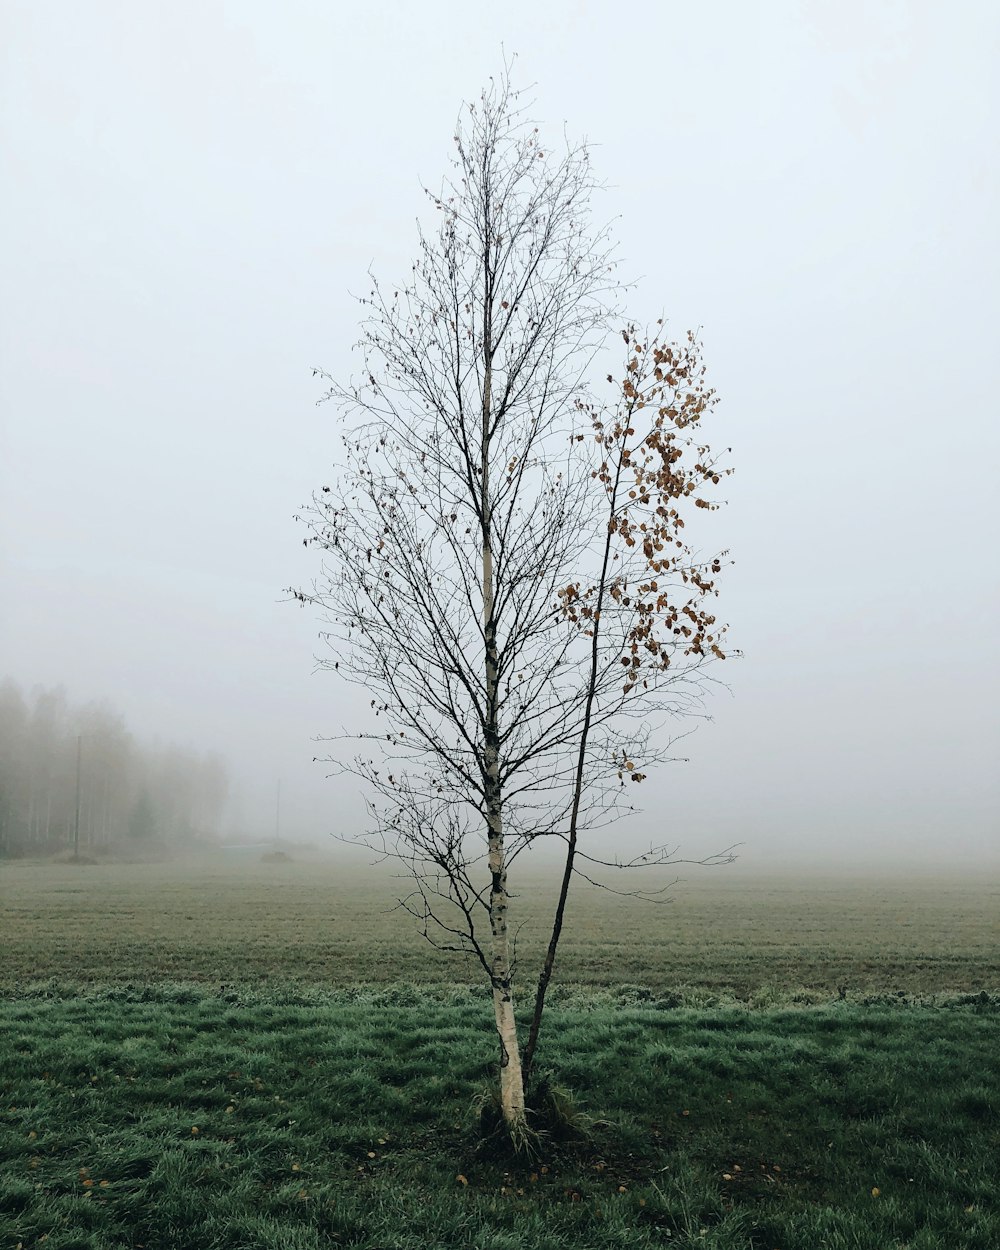 brown leafless tree on green grass field during foggy weather